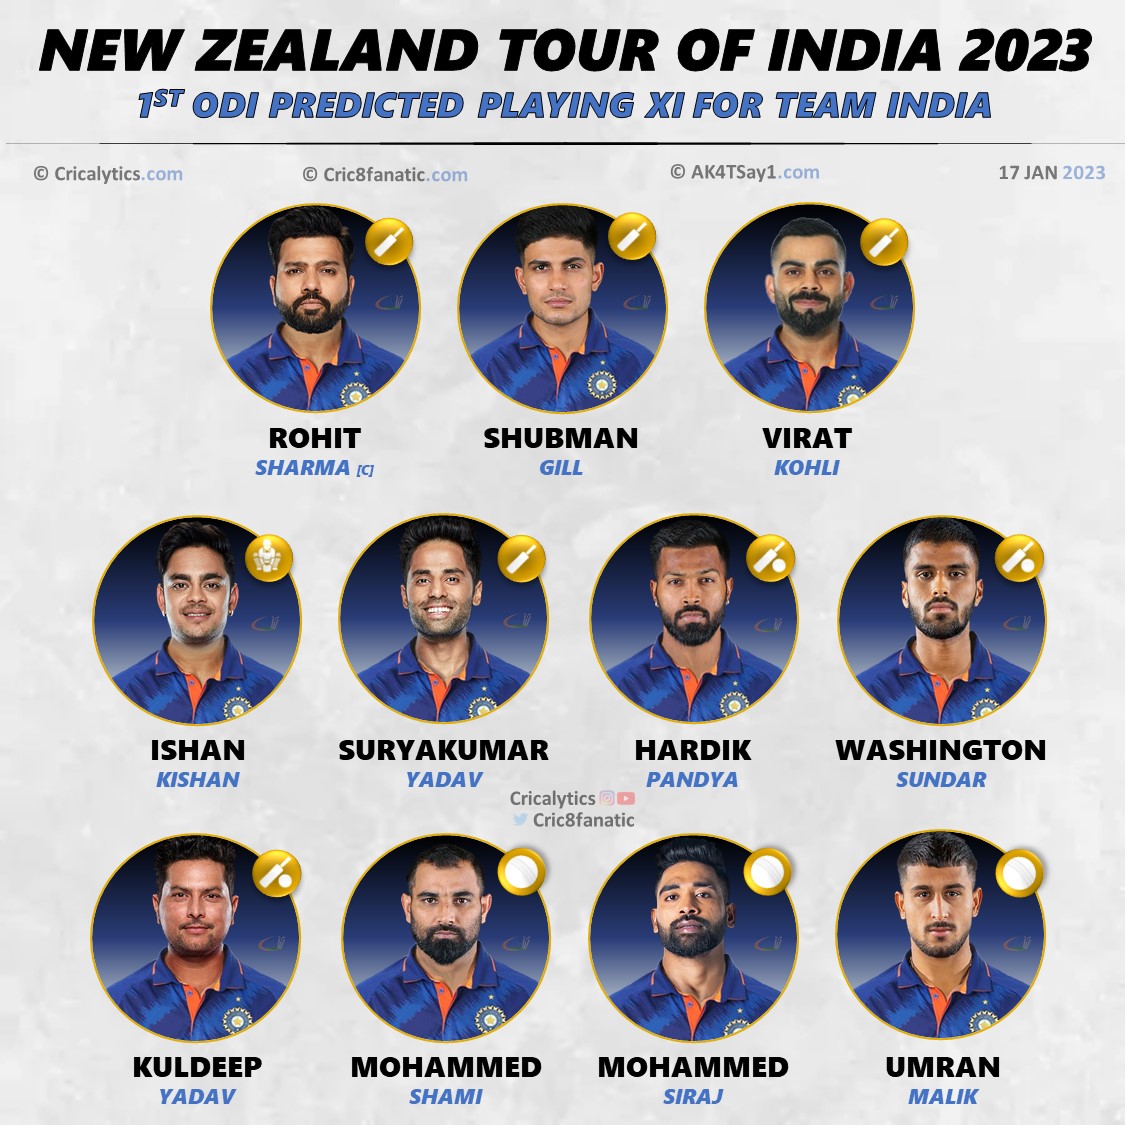 india vs new zealand 2023 confirmed 1st odi playing 11